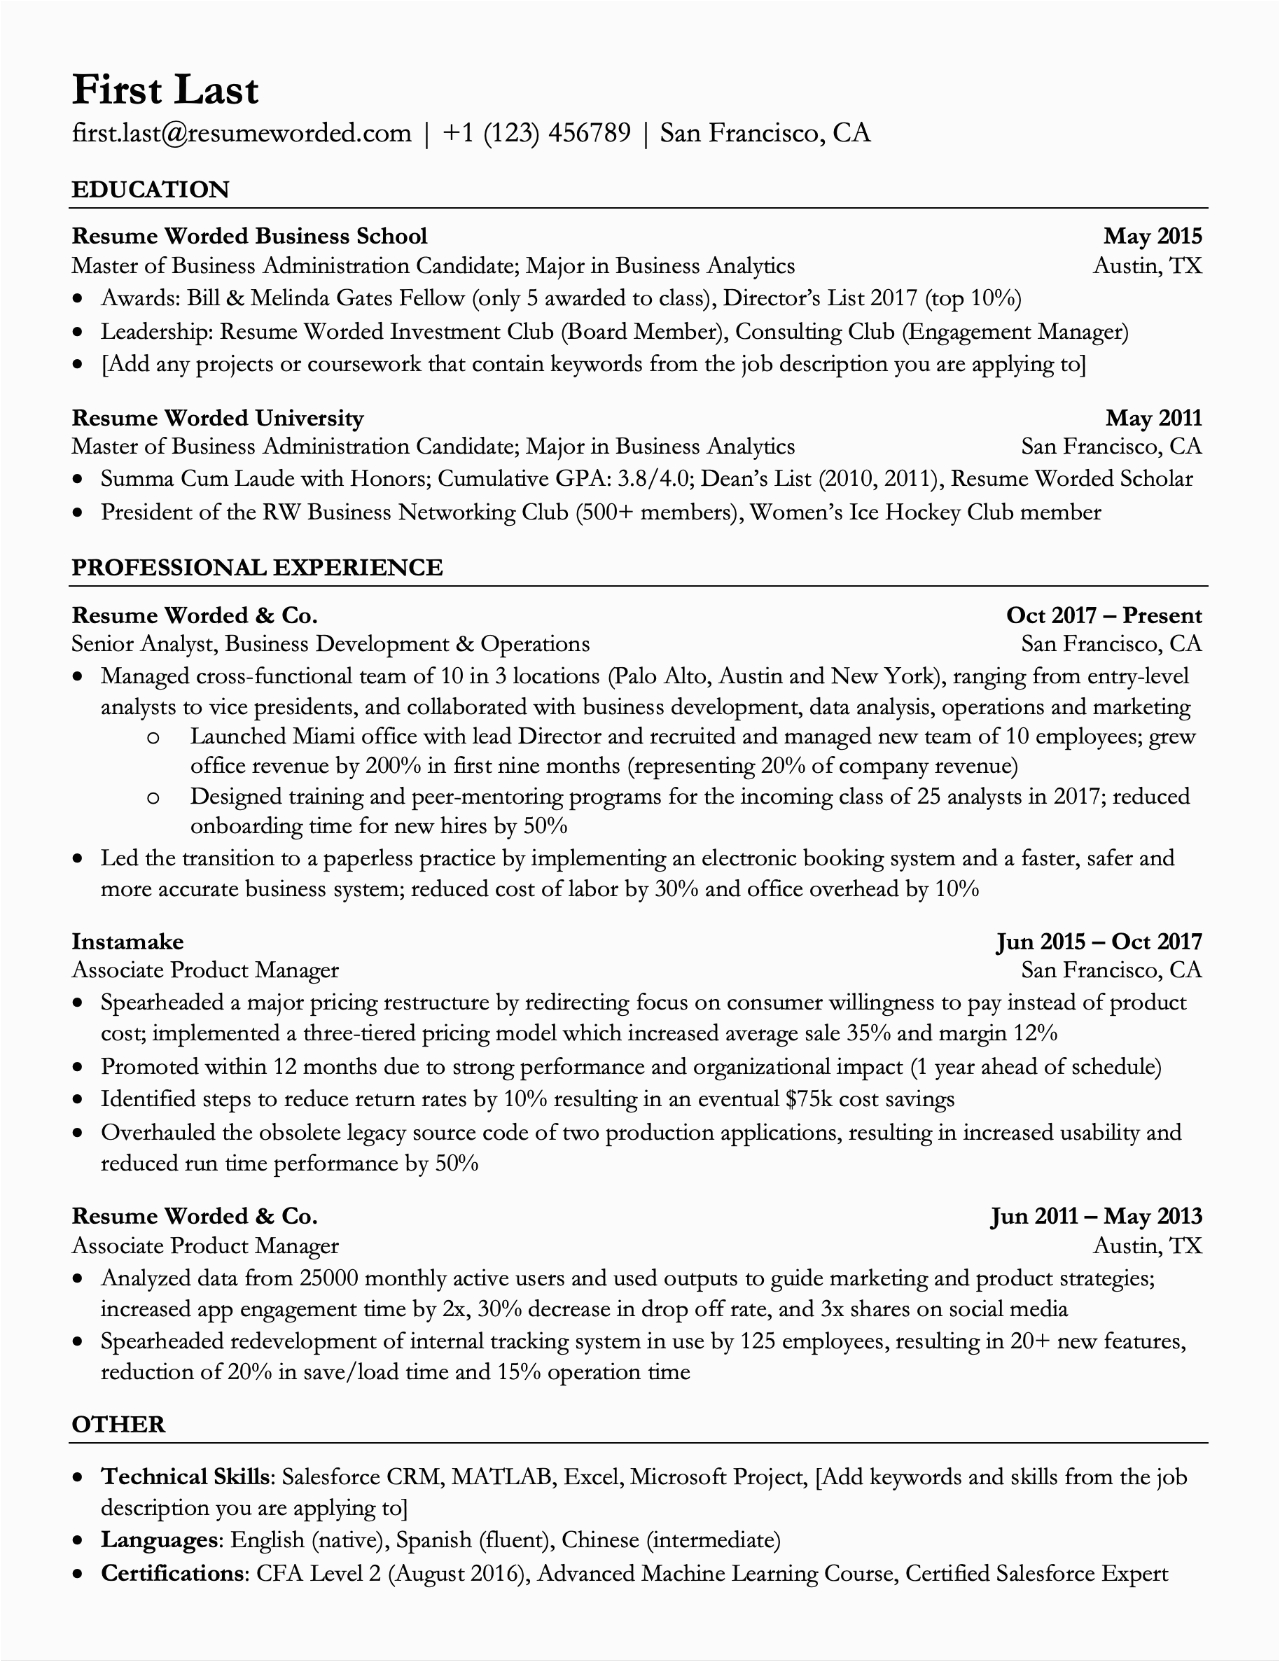 Chronological Resume Sample 2023 for ats Professional ats Resume Templates for Experienced Hires and College